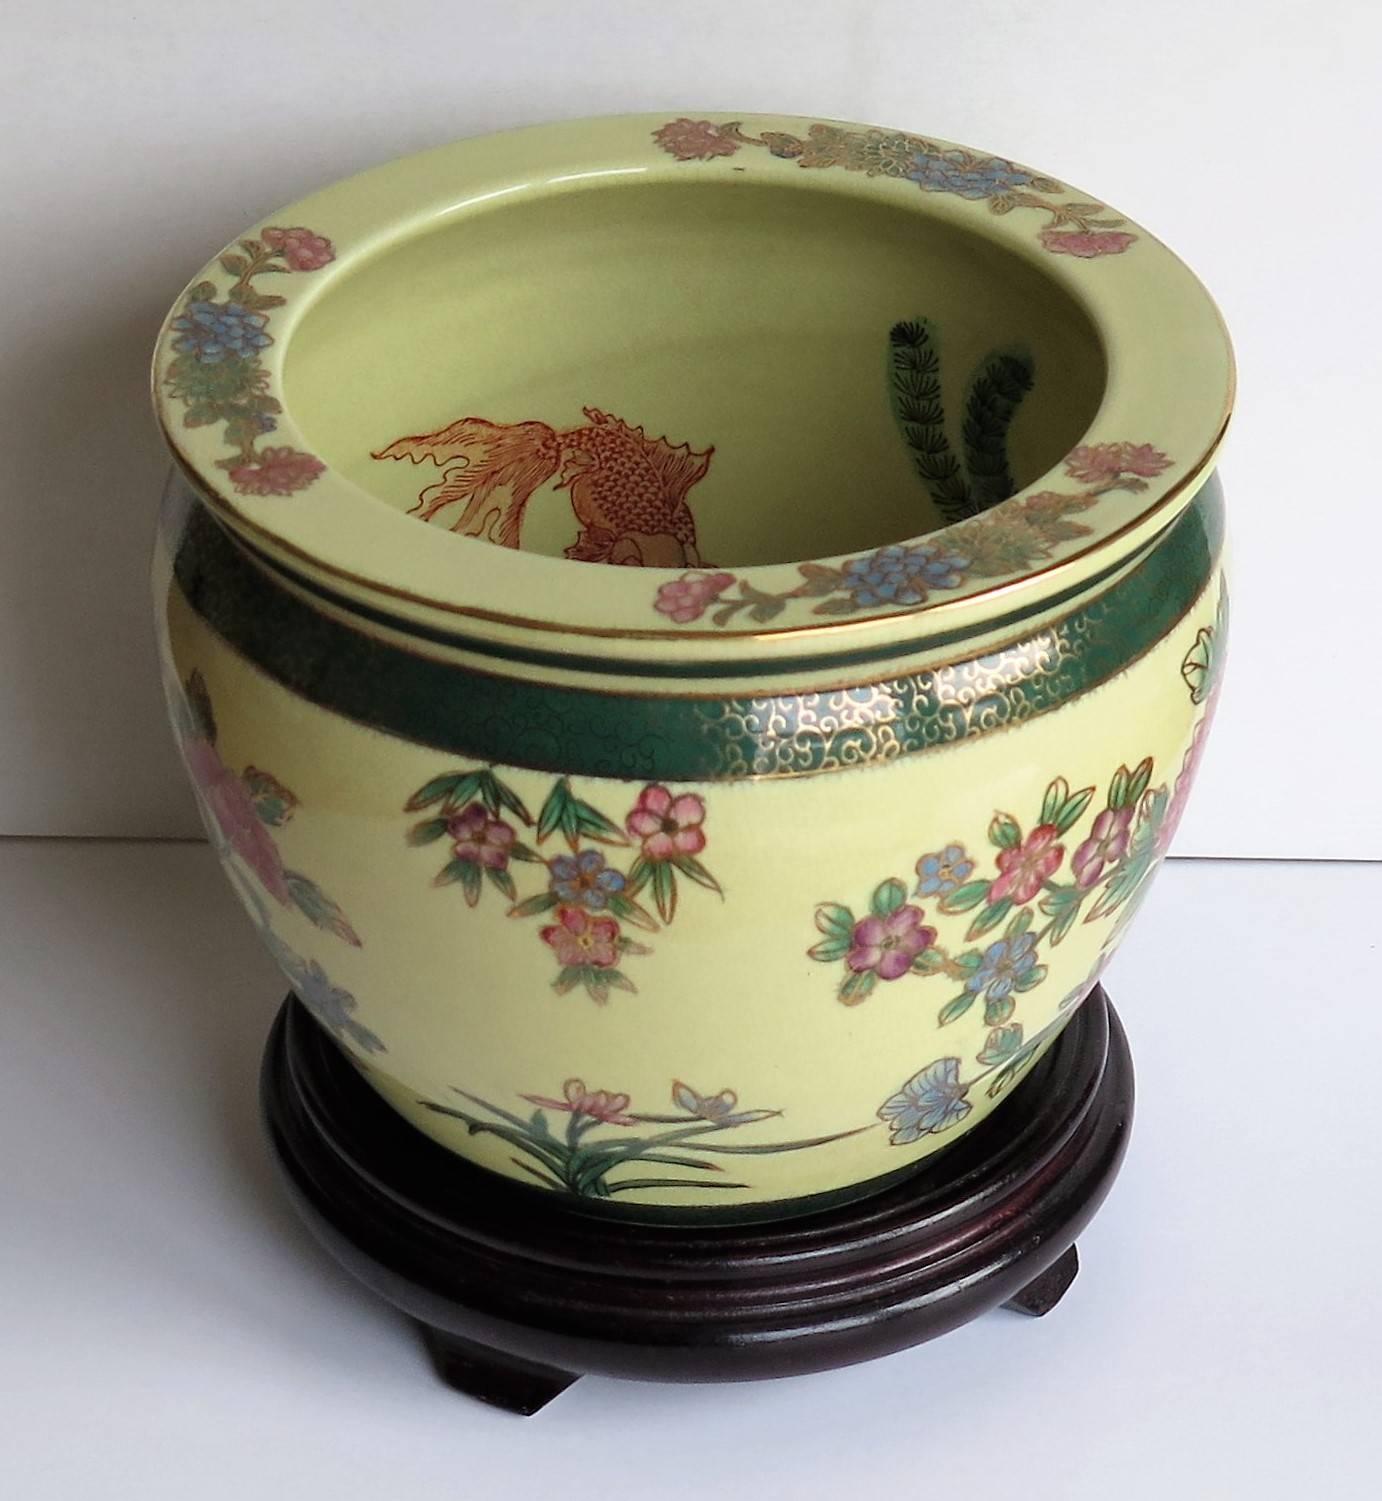 This is a very good porcelain fish bowl or jardiniere complete with its own wood stand.

The bowl is well potted and heavy, weighing over 2kg unpacked. 

The bowl is hand-painted outside and inside; to the outside are Peony and other flowers,